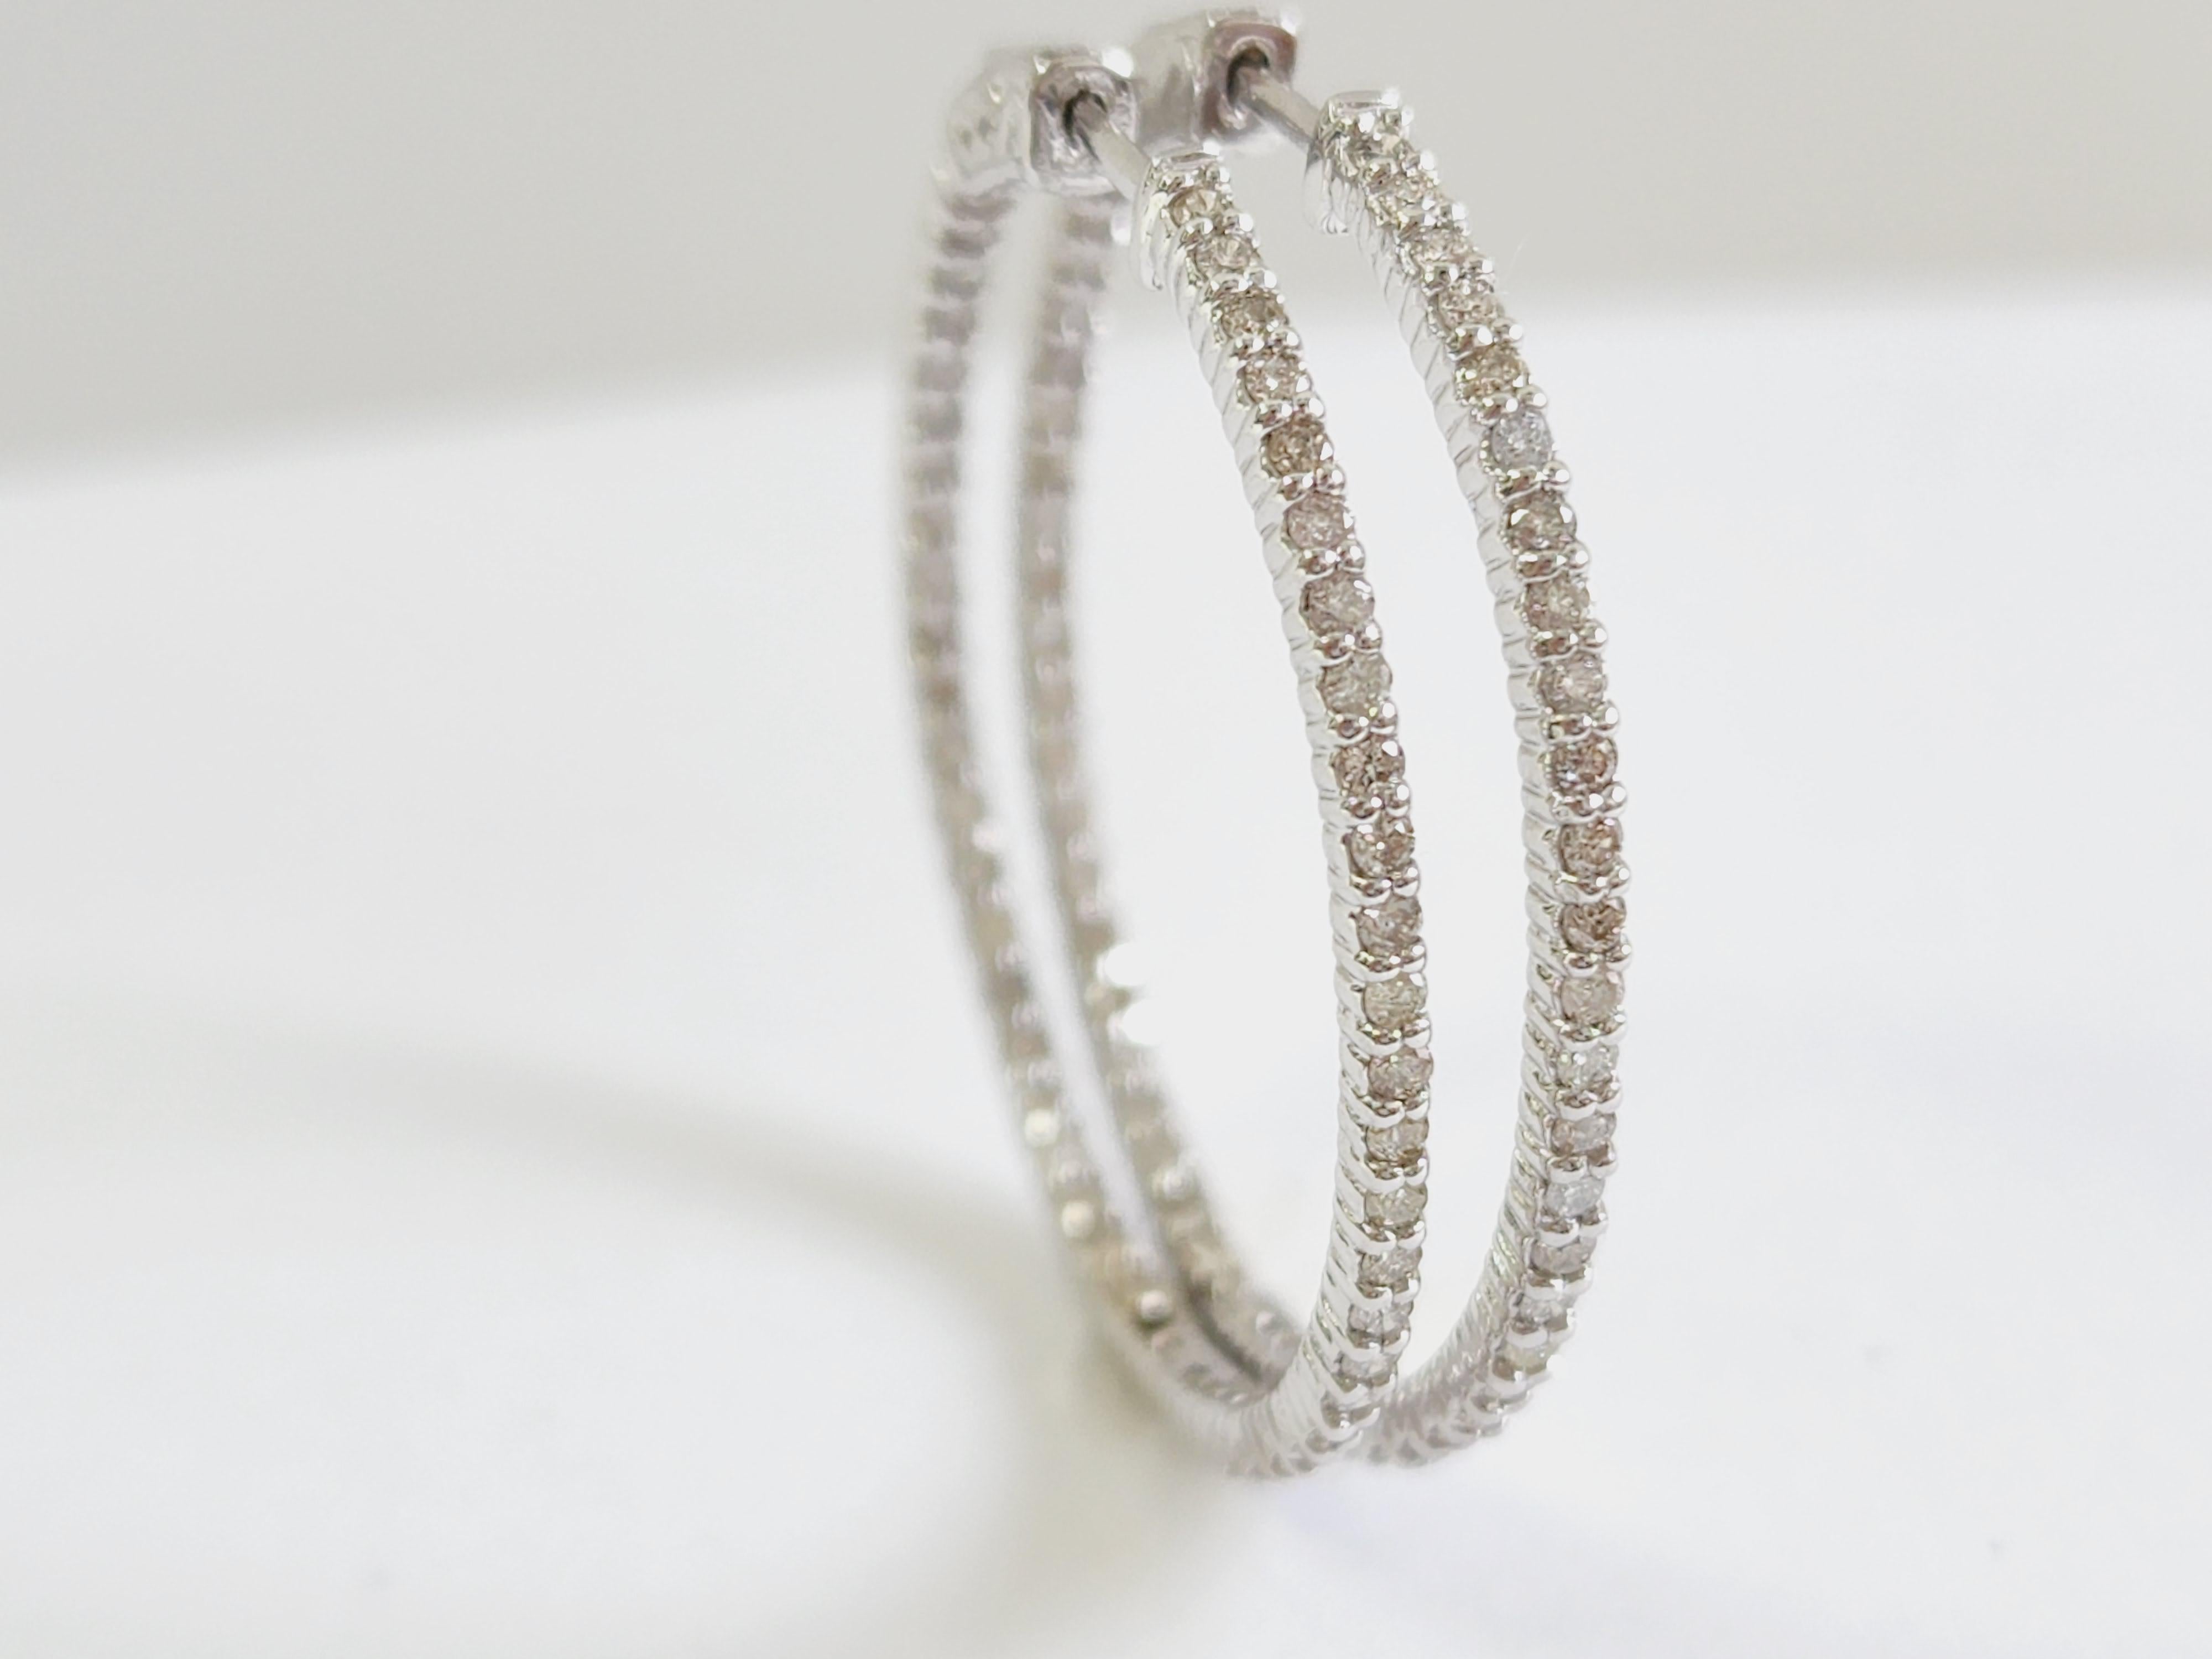 Beautiful pair of diamond inside out hoop earrings in 14k white gold. Secures with snap closure for wear. 
Measures 1.25 inch x 1.25 inch diameter. 
Average I Color, SI Clarity